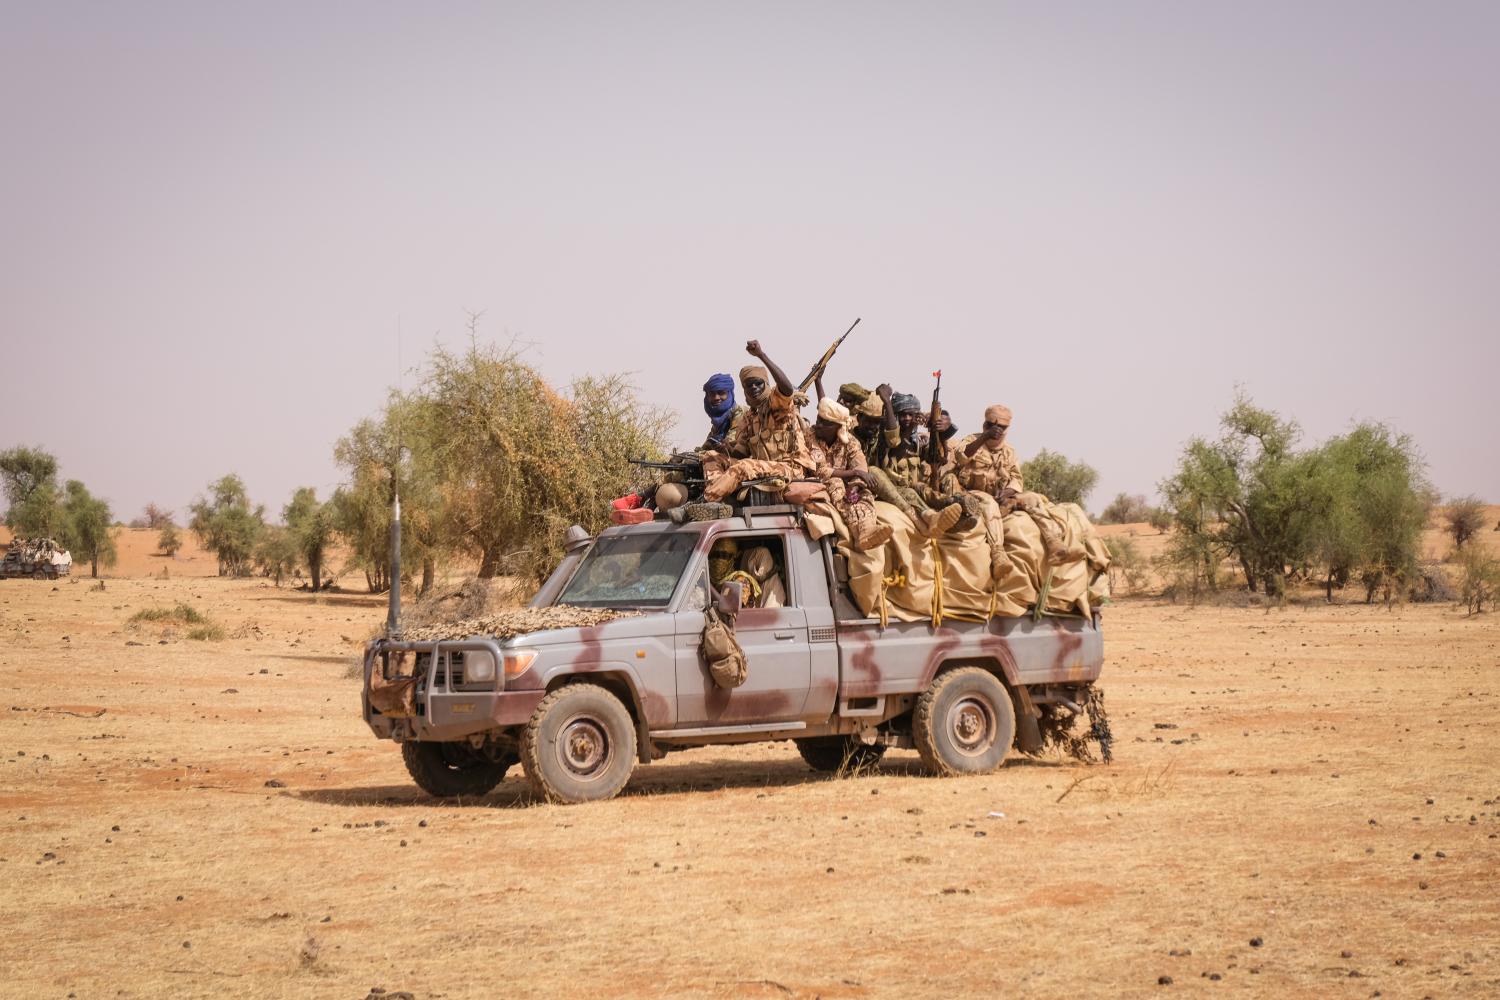 Chadian soldiers during an operation with G5 Sahel and french forces from Barkhane Operation. Tin-Akoff - Burkina Faso - April 2021.Soldats tchadiens lors d une operation avec le G5 Sahel et les forces francaises de l operation Barkhane. Tin-Akoff - Burkina Faso - Avril 2021.